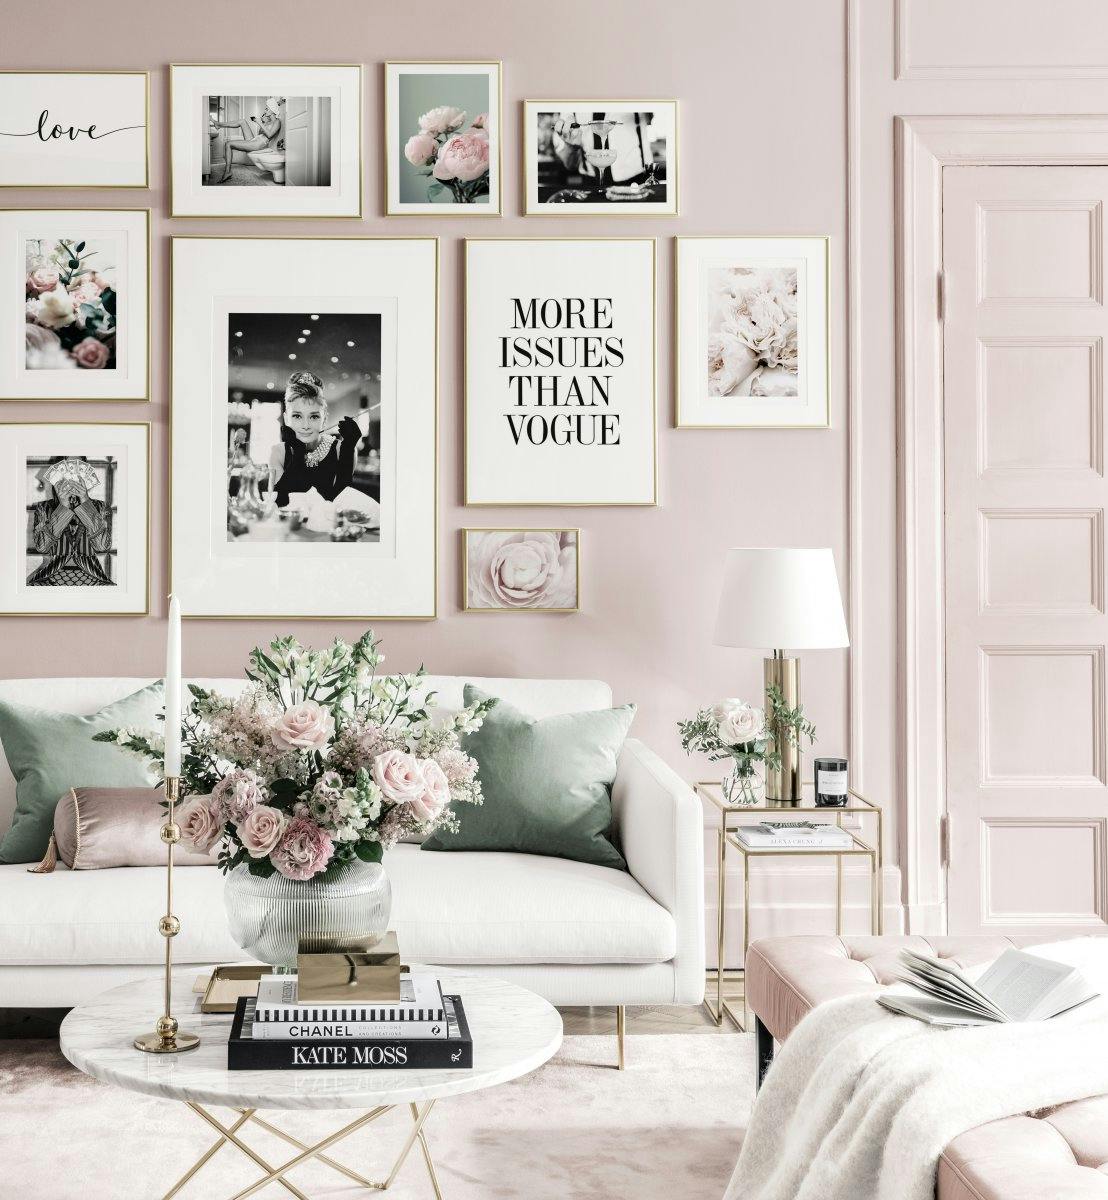 Fashionable gallery wall bestselling posters pink interior golden frames